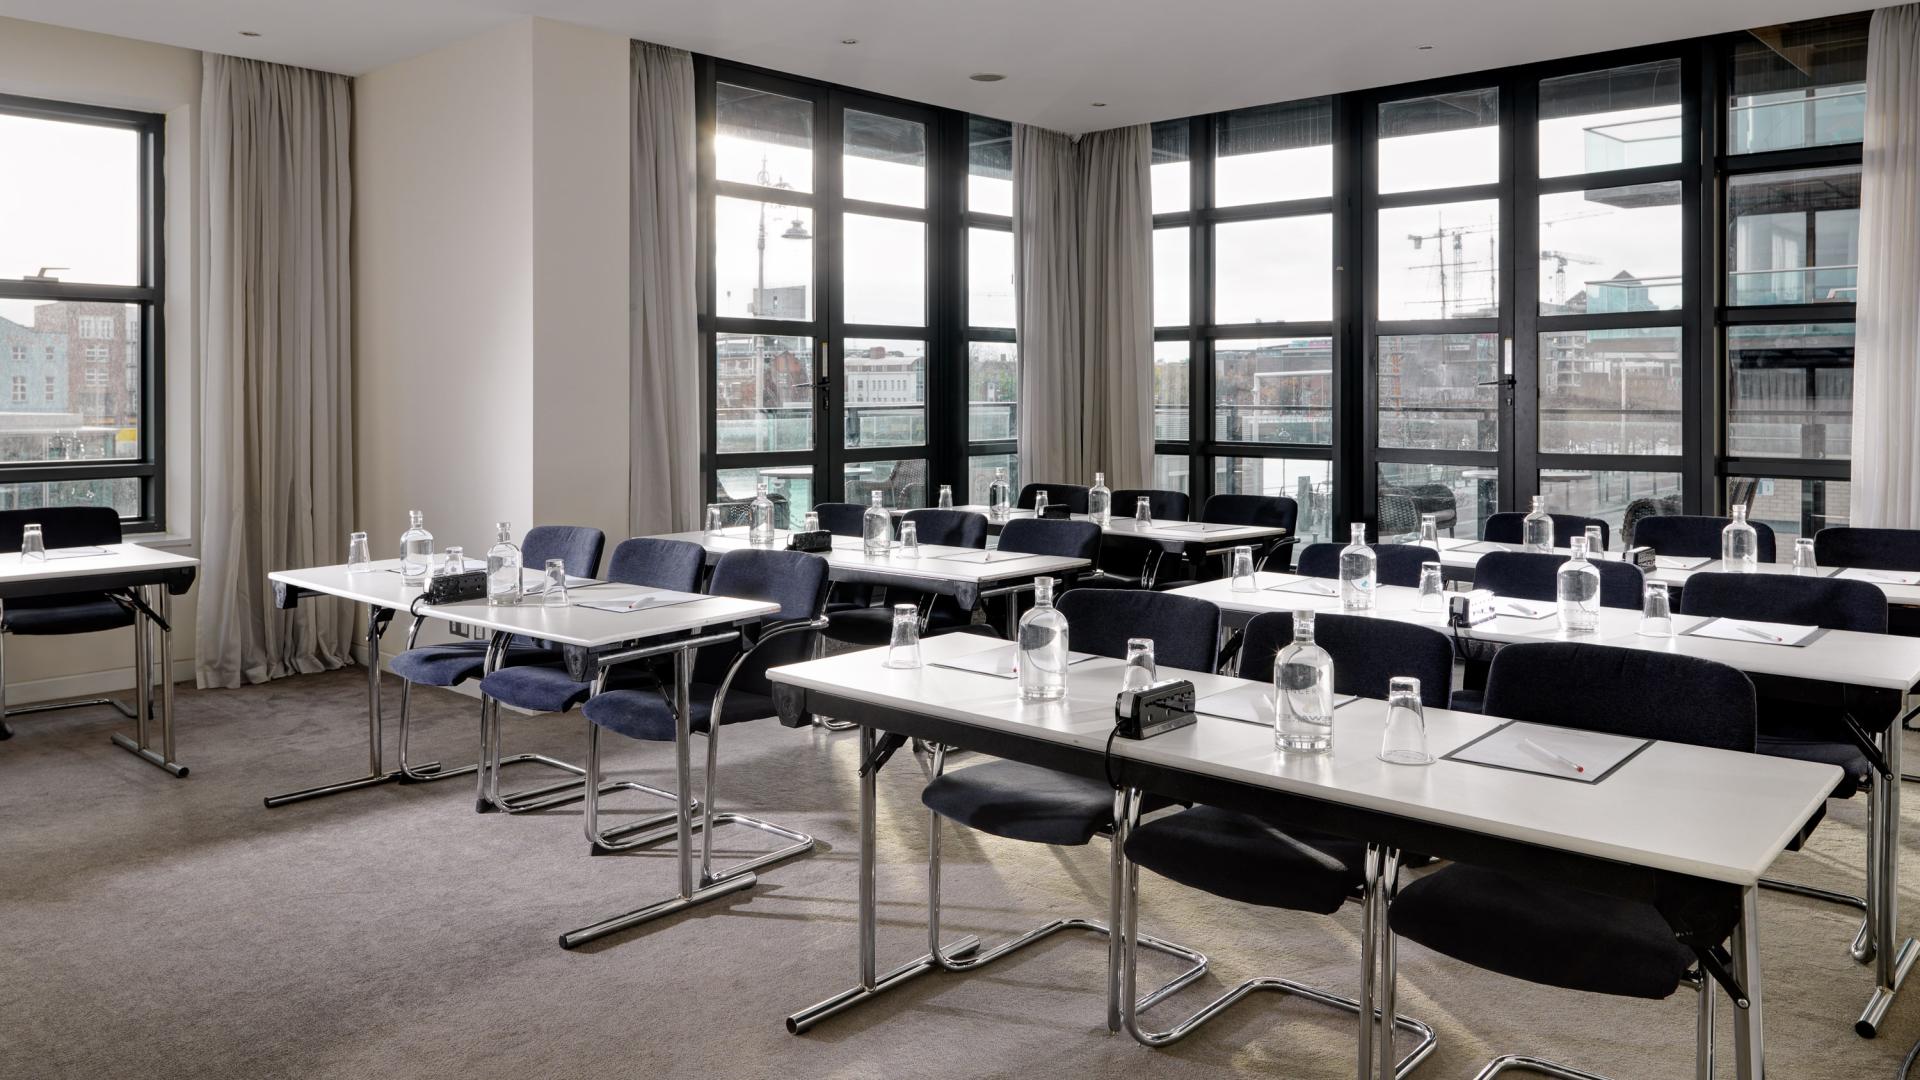 Meeting Rooms for Hire in Dublin